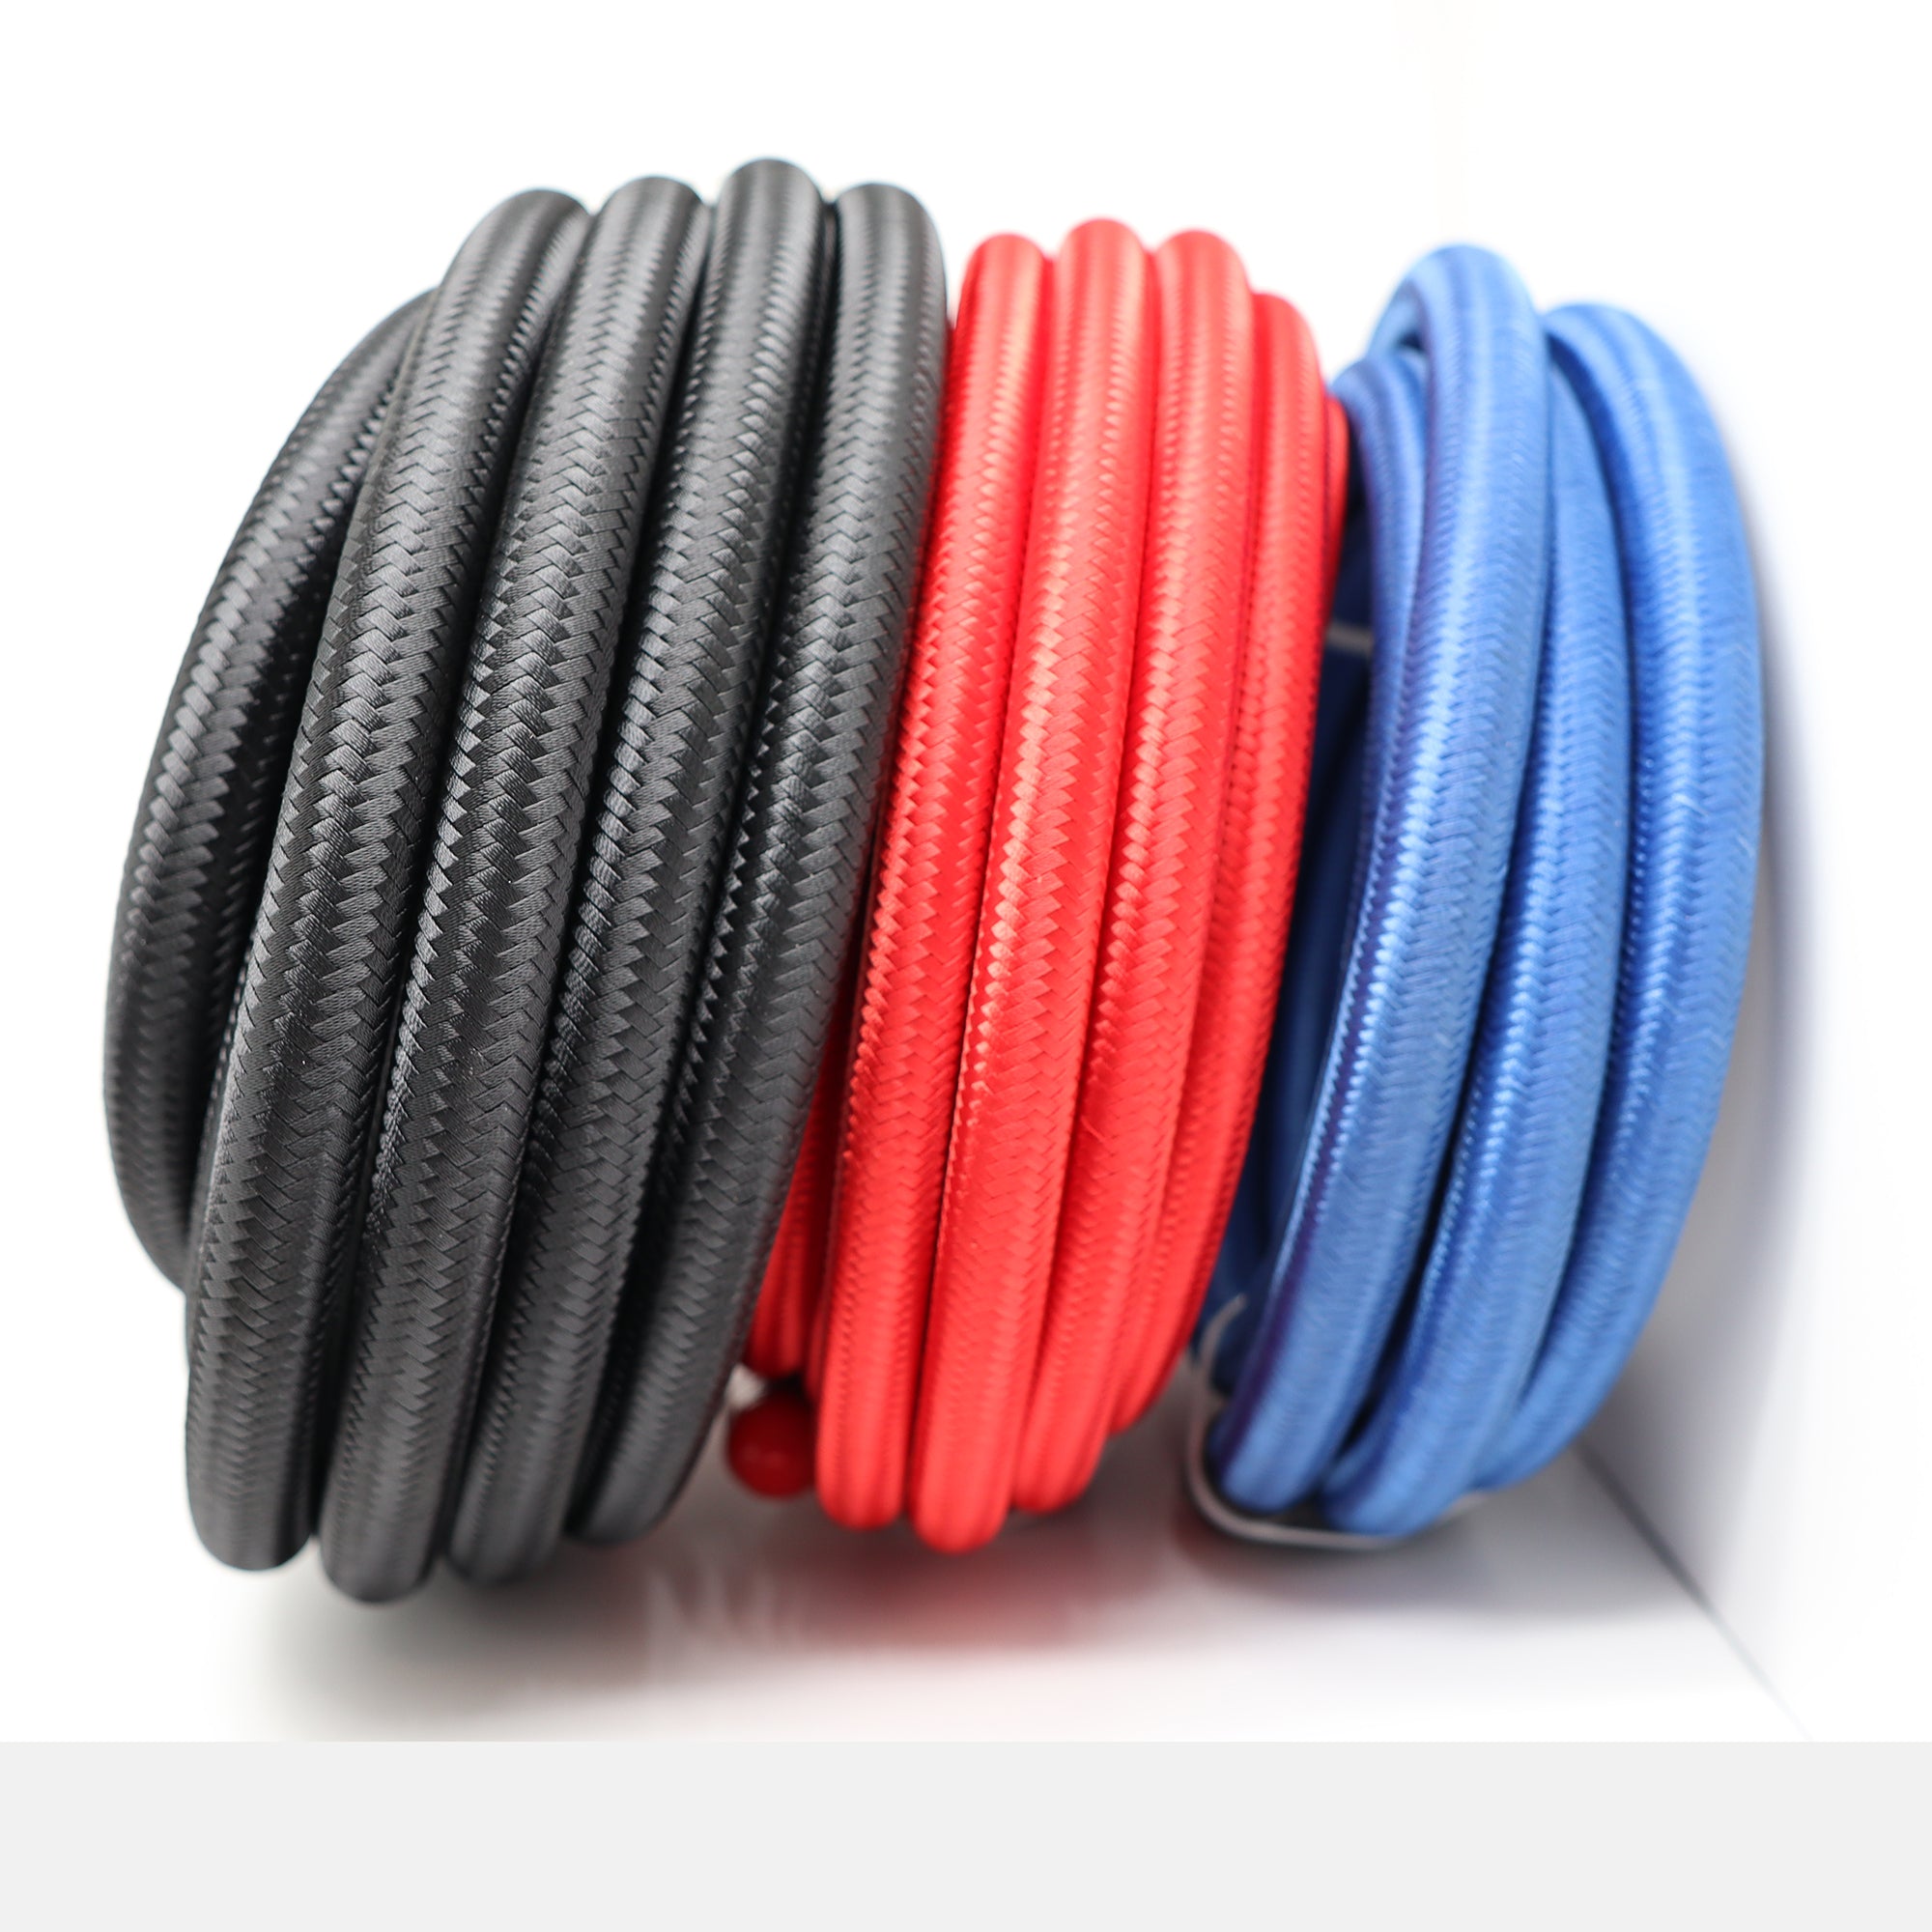 Nylon Stainless Steel Braided PTFE Fuel Hose - Blue/Red/Black 3/8 10mm ID - PTFE 20ft Hose / Blue